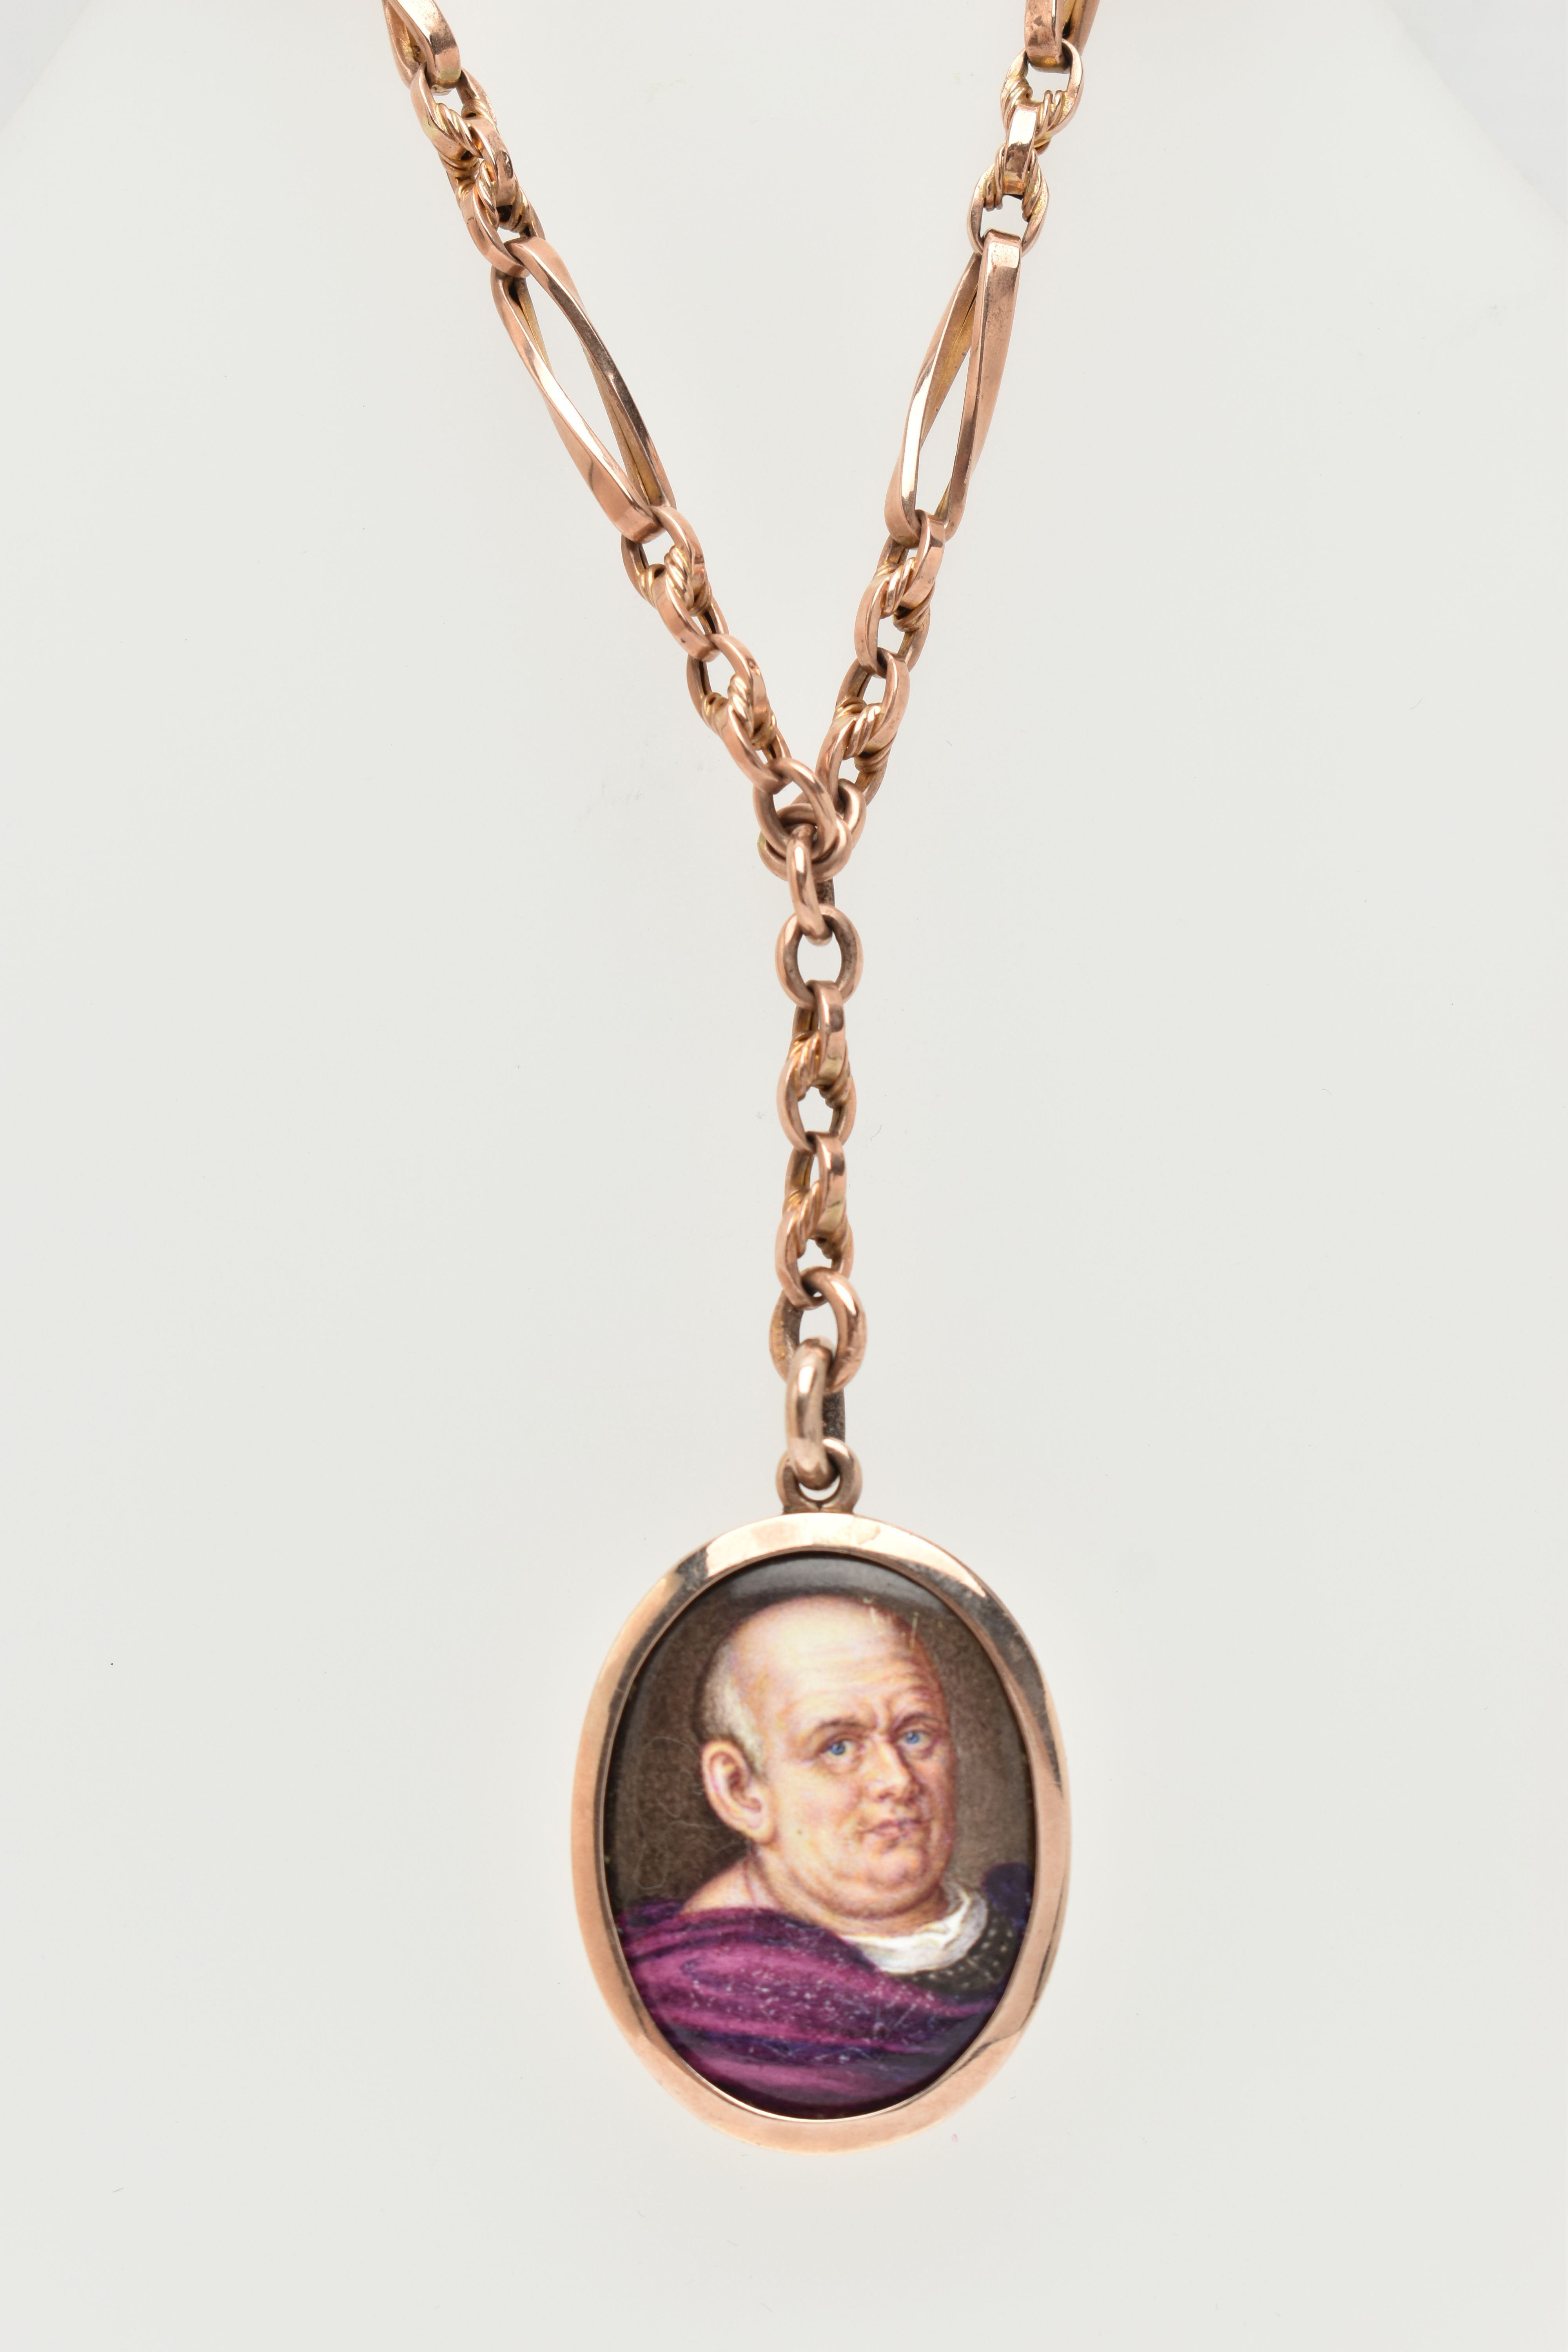 AN EARLY 20TH CENTURY MINIATURE PORTRAIT PENDANT AND CHAIN, the oval enamel pendant depicting a - Image 2 of 7